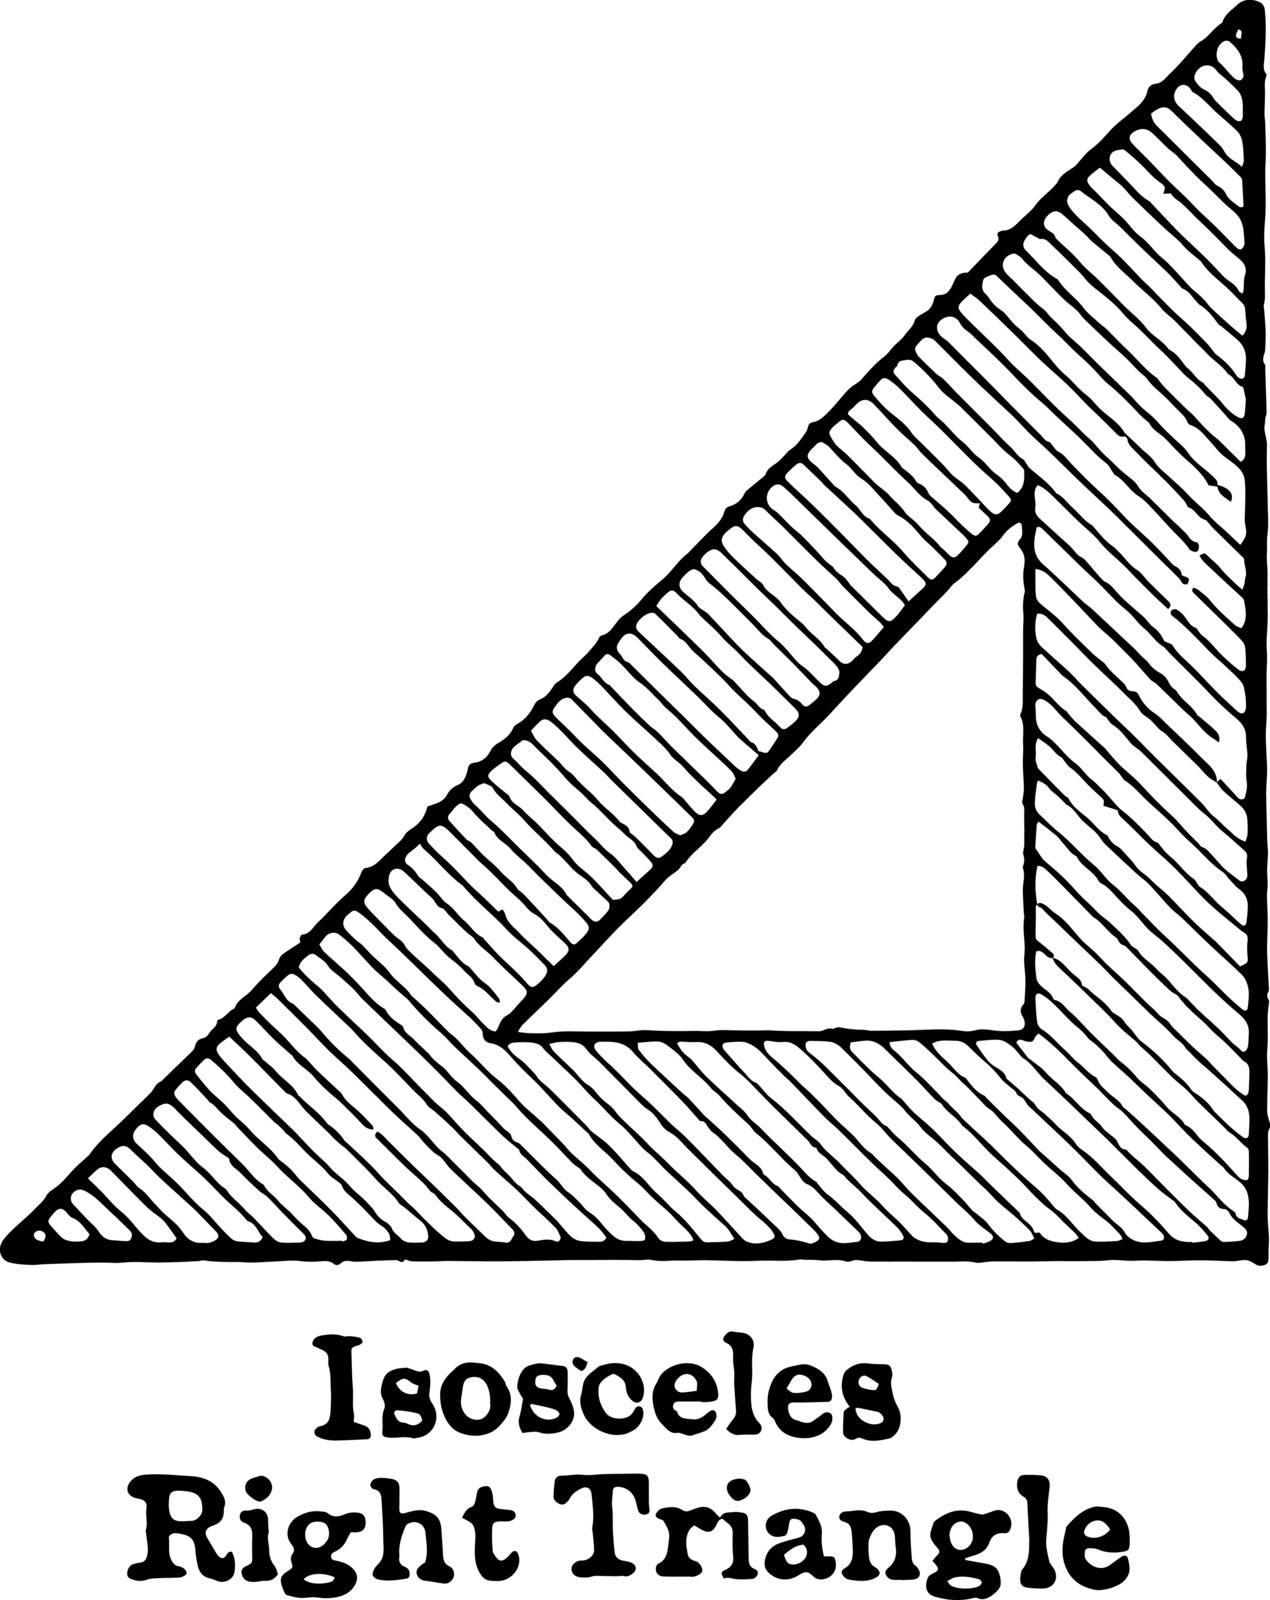 This is an image of isosceles right triangle. All angles of this triangle are the same, vintage line drawing or engraving illustration.